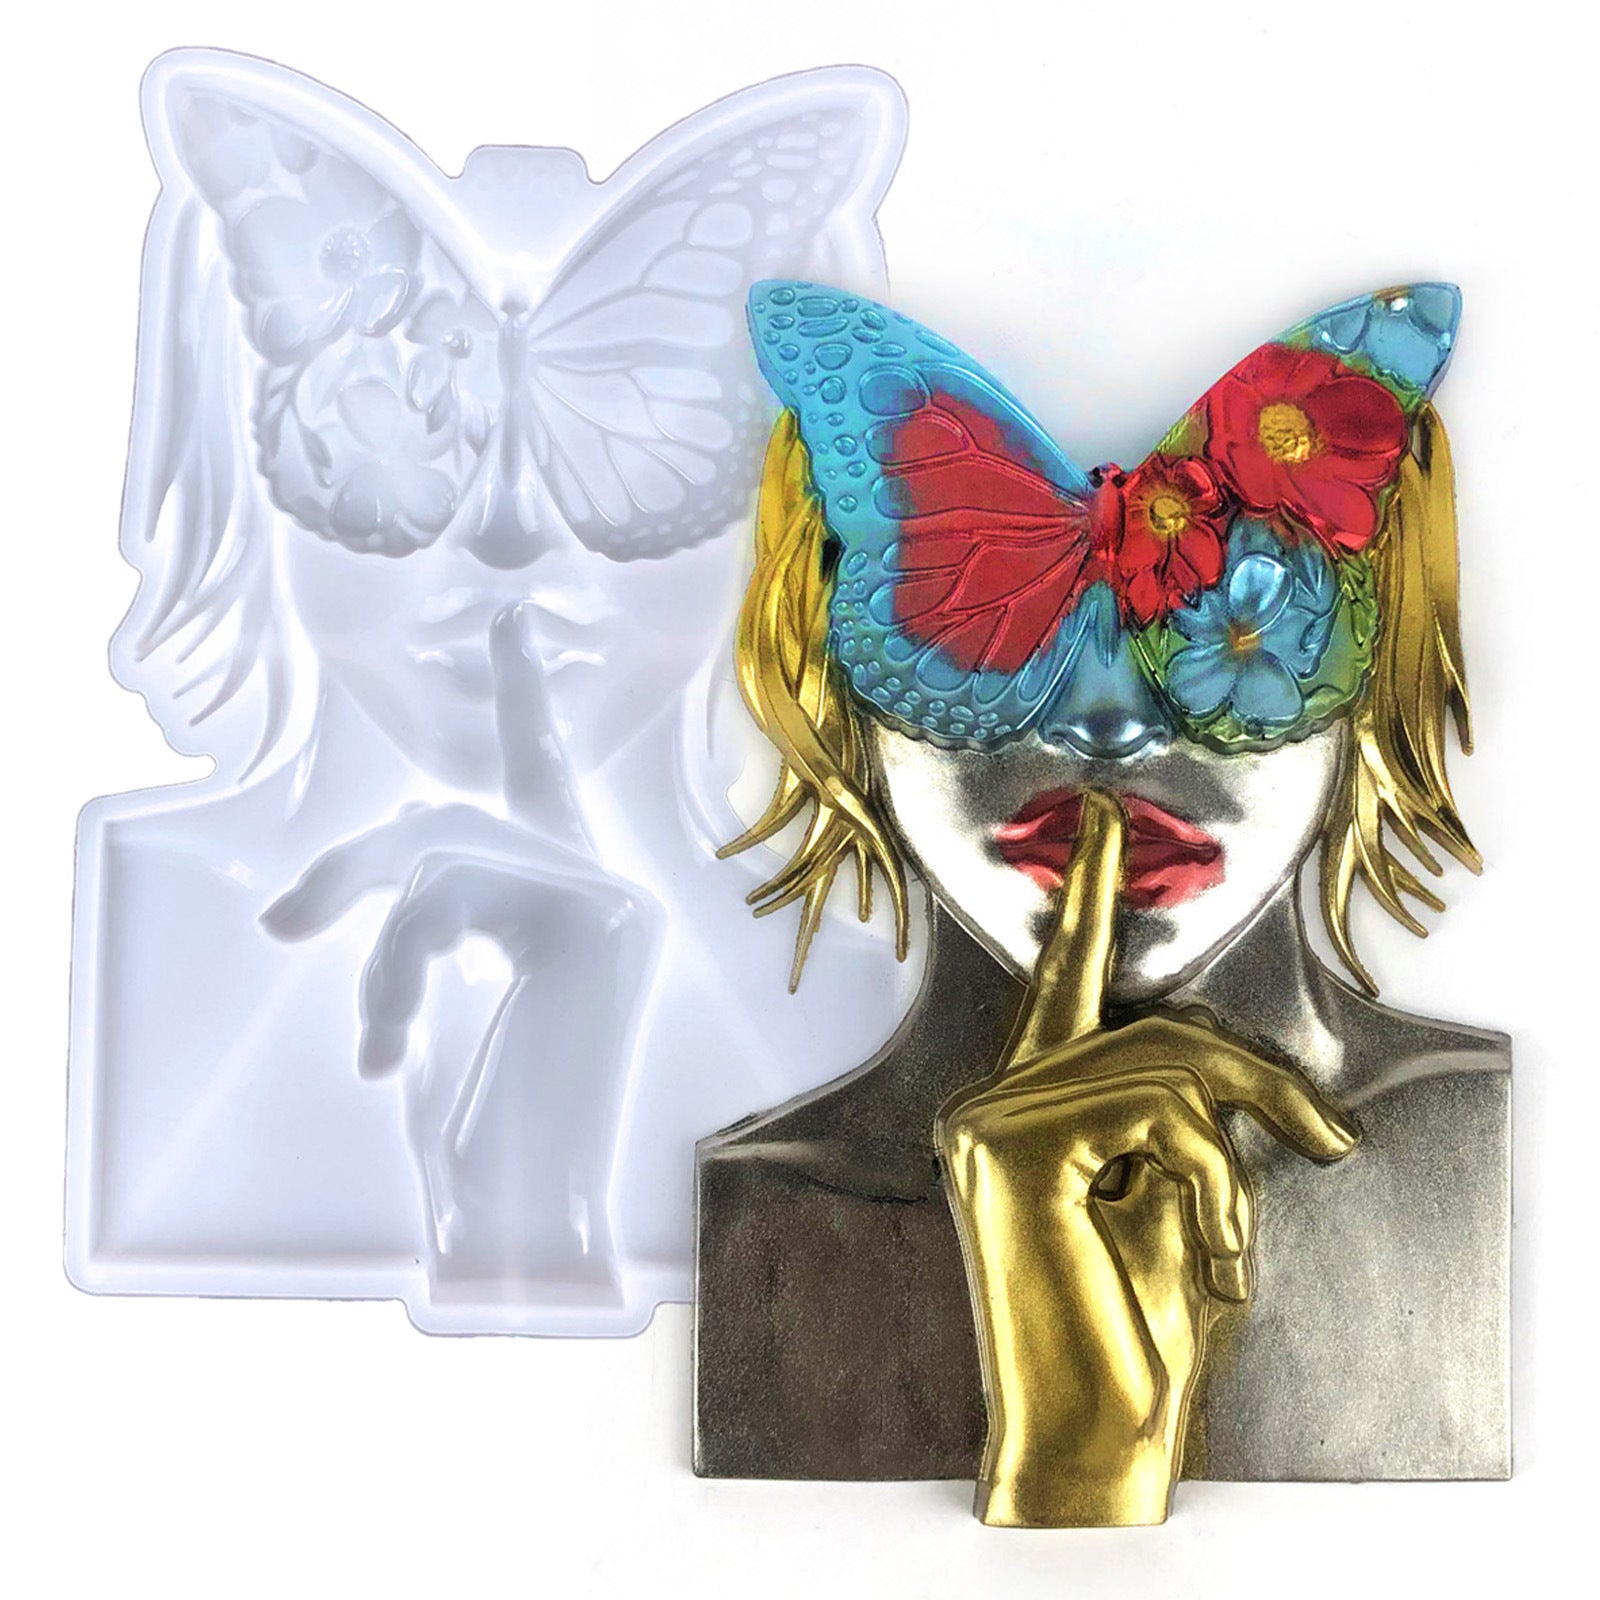 Mysterious Butterfly Beauty Wall Hanging Resin Mold – IntoResin